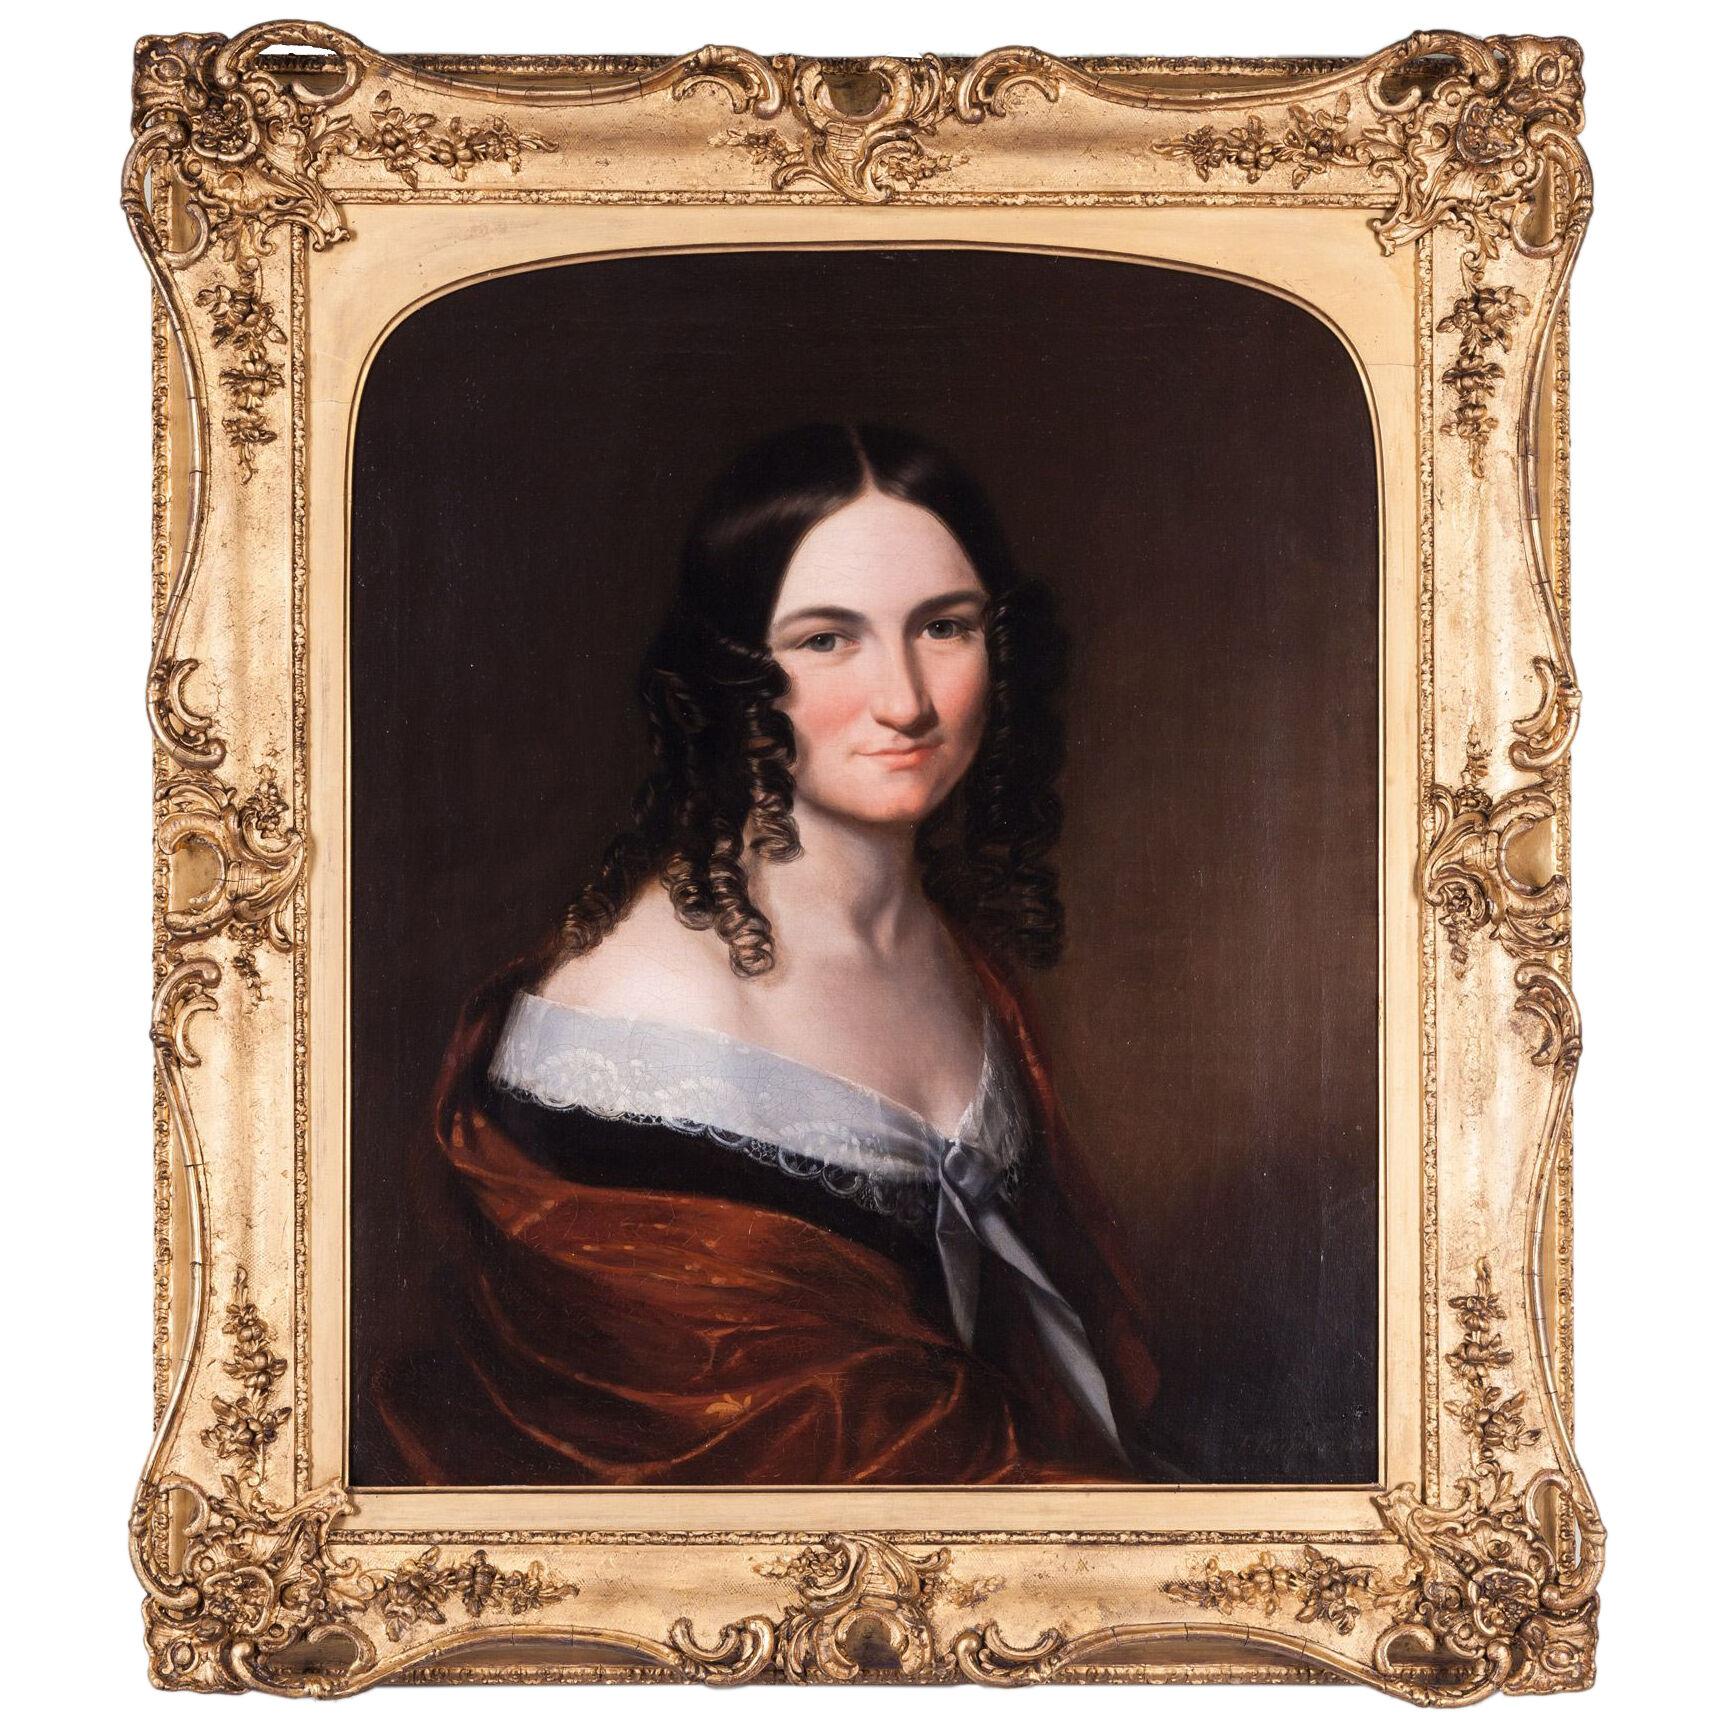 A Young Woman's Portrait by J. Barker